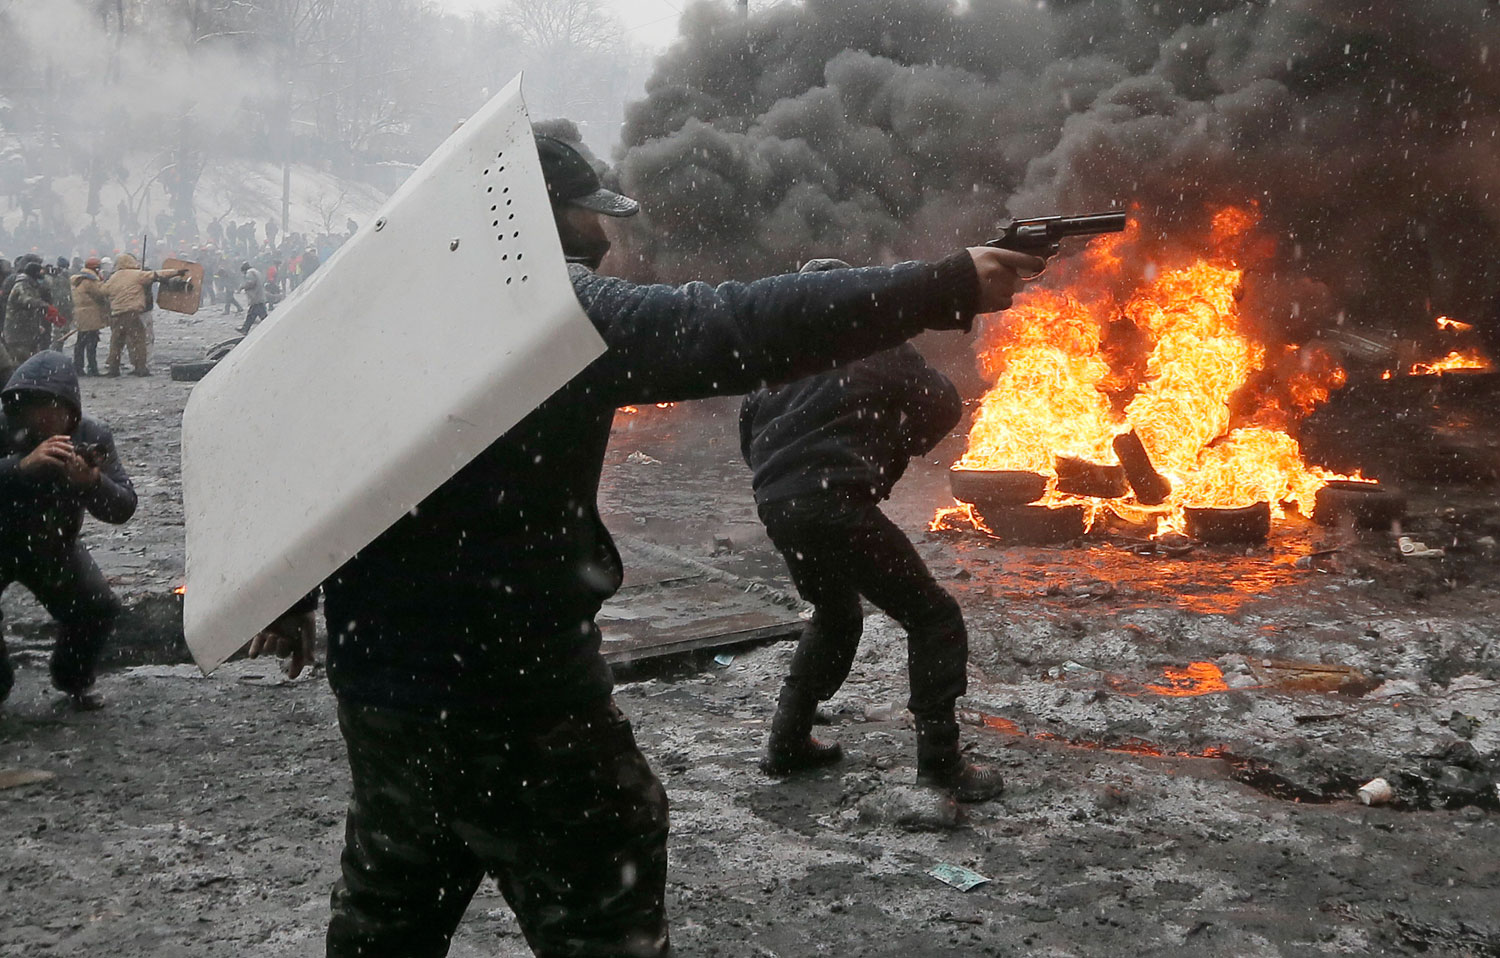 A protester points a handgun during a clash with police in central Kiev,  Jan. 22, 2014.